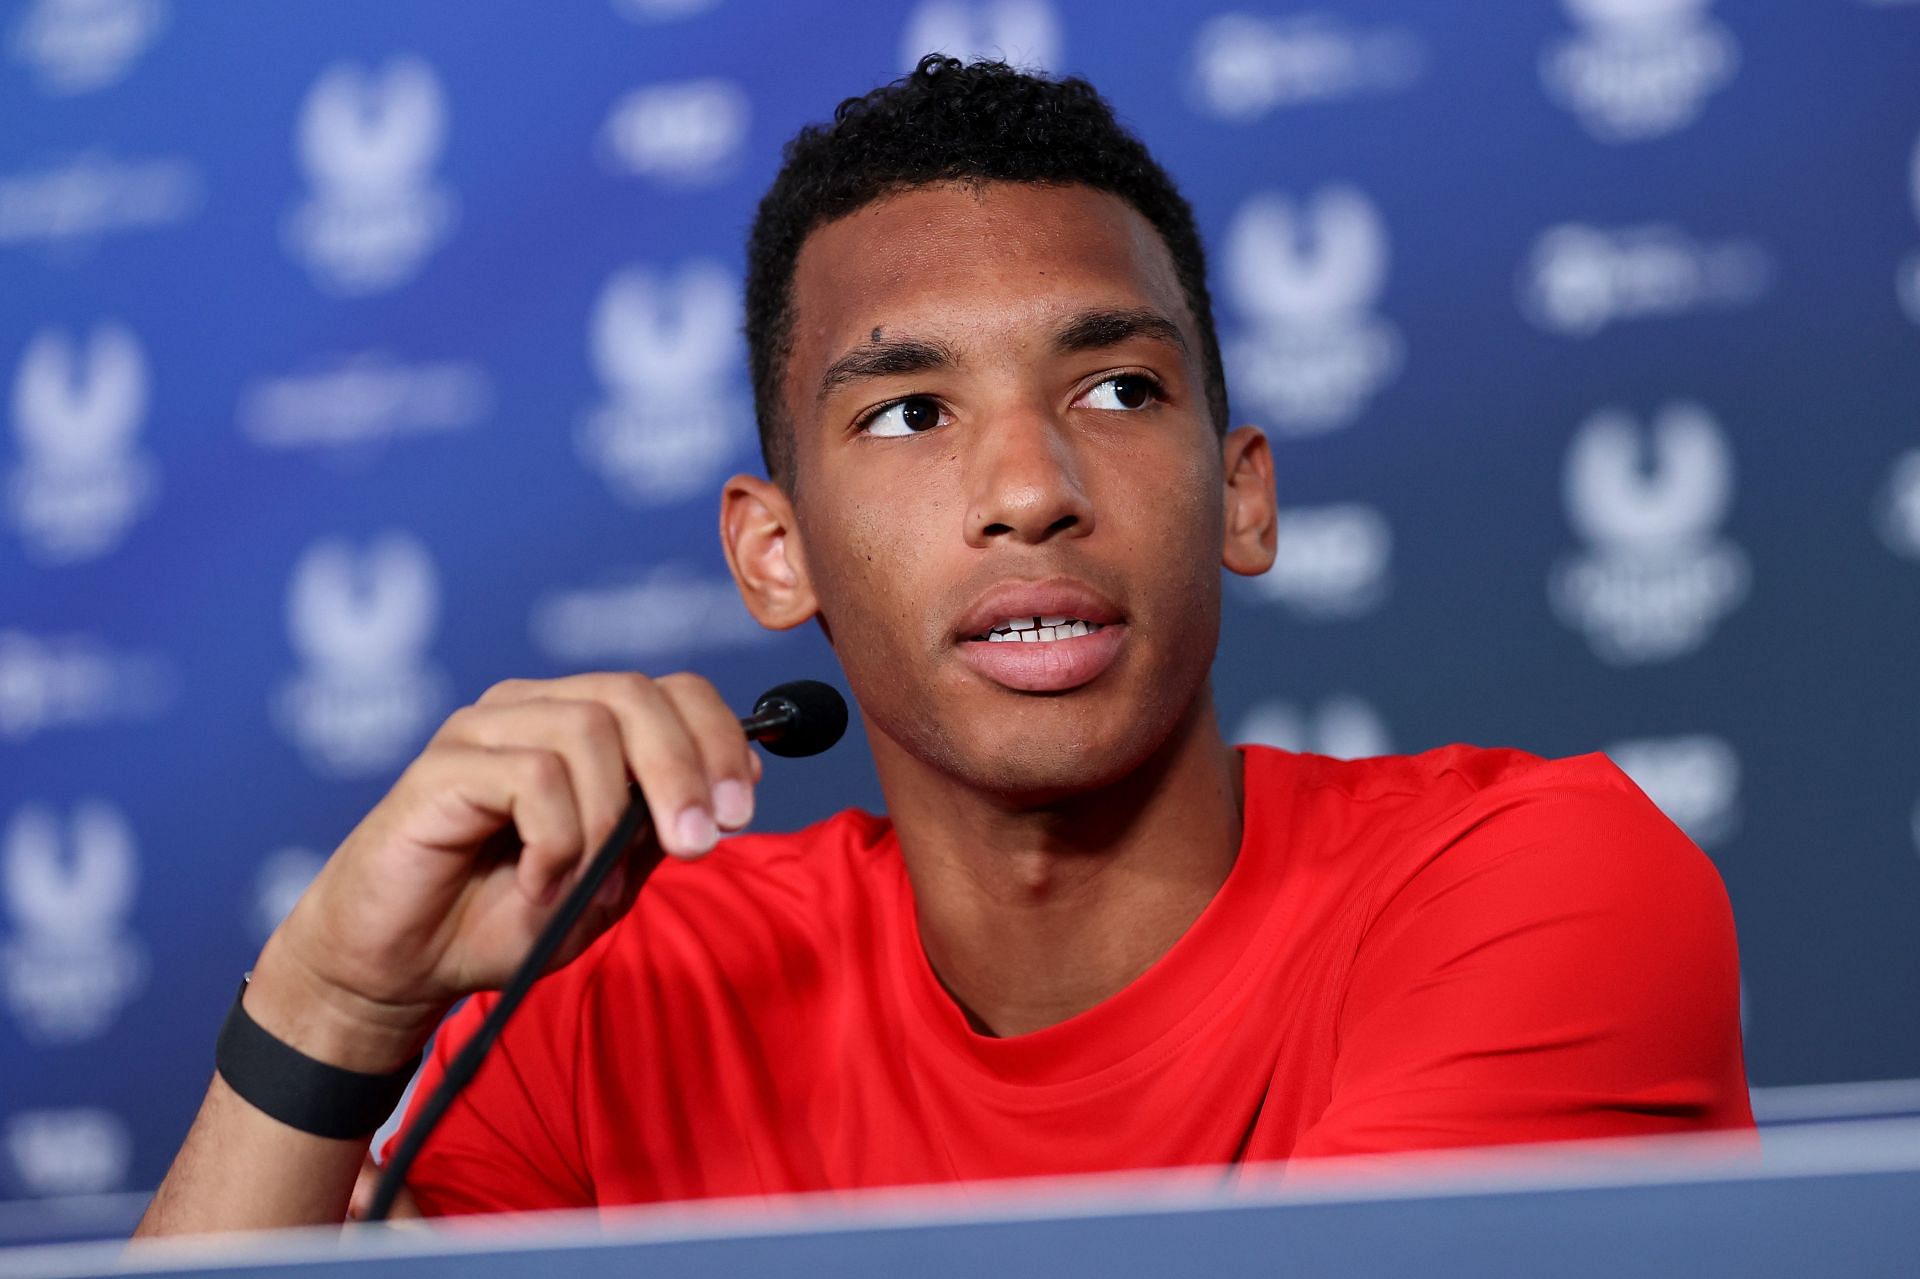 Felix Auger-Aliassime at a press conference during United Cup